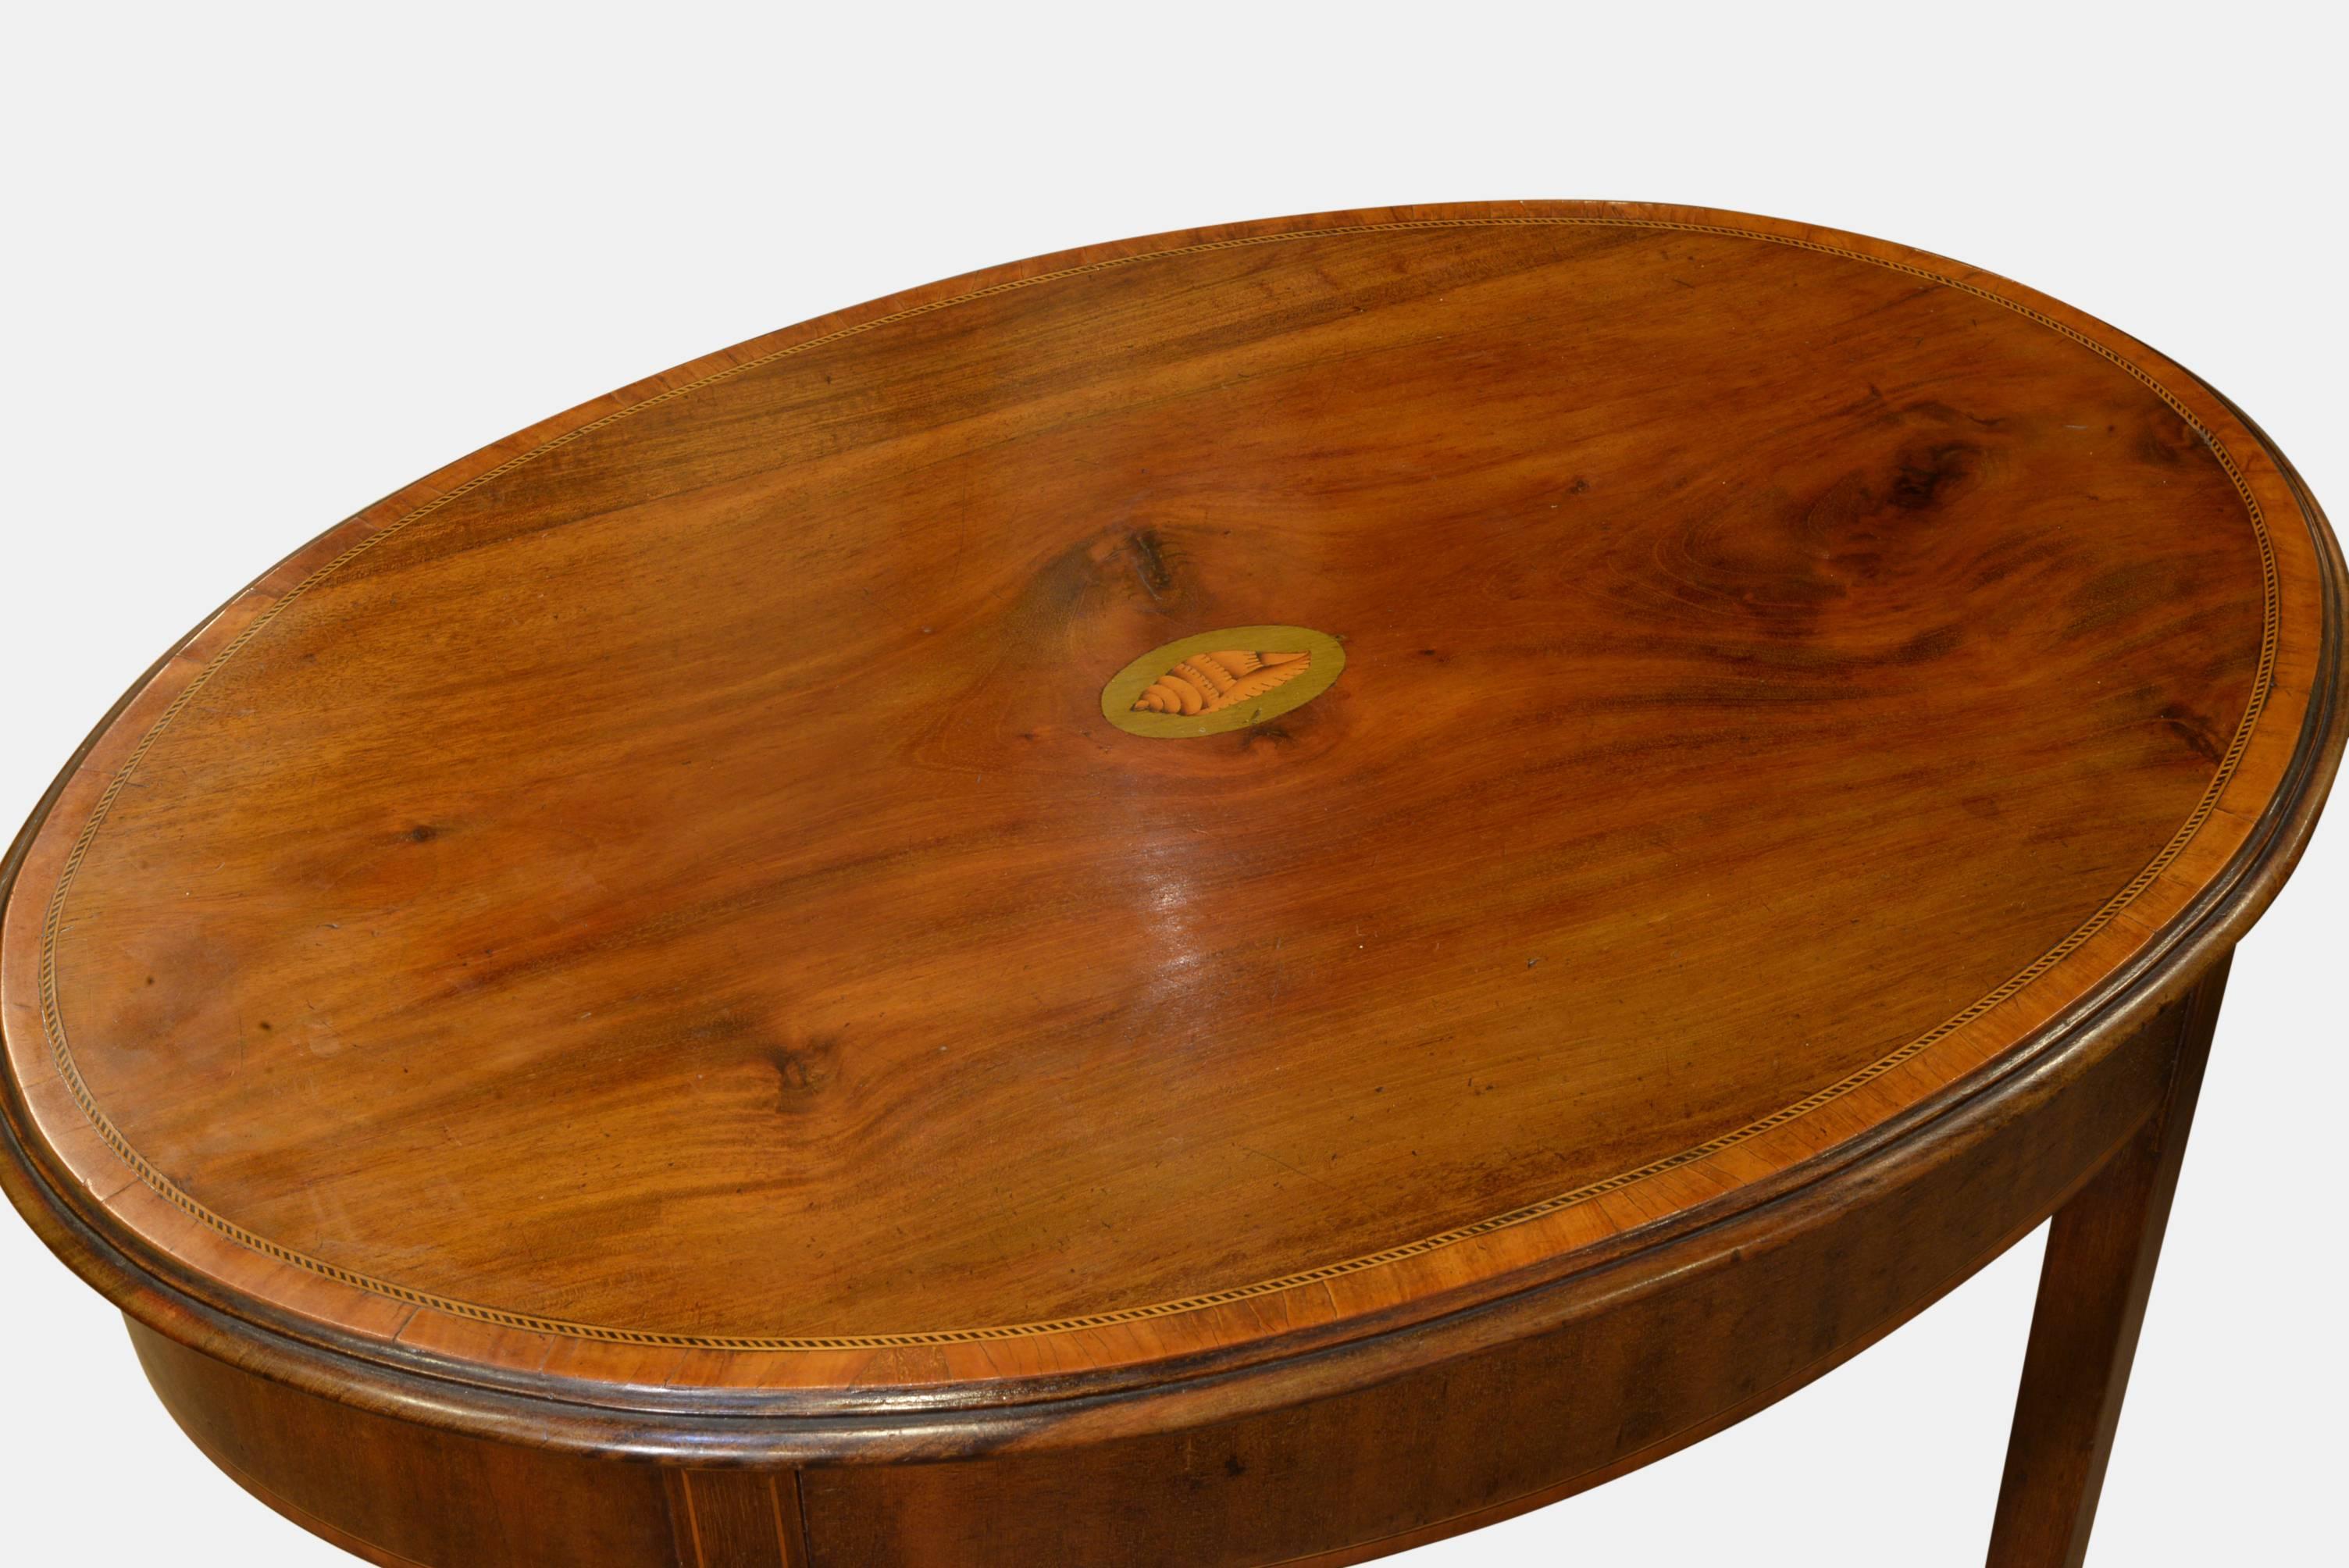 An Edwardian inlaid oval mahogany occasional table,

circa 1910.

Measures: 71cm (28.0